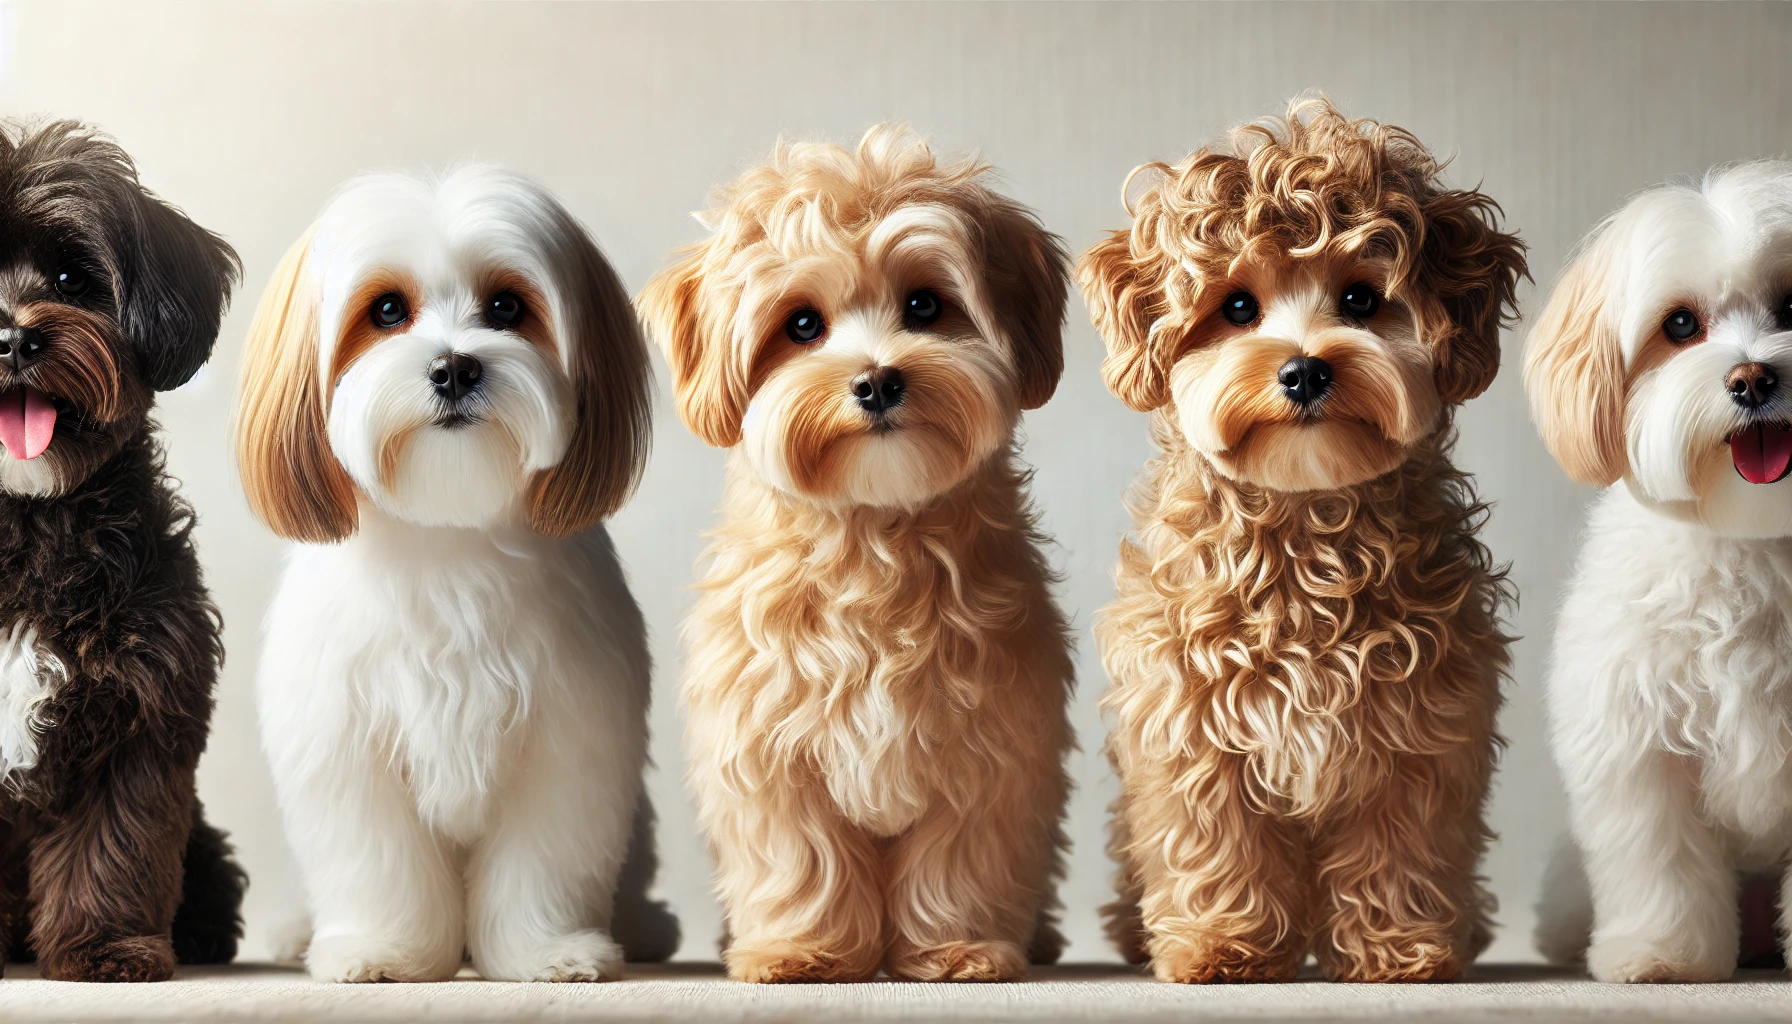 image of three Maltipoo dogs side by side. One Maltipoo has straight hair, another has wavy hair, and the third has curly hair